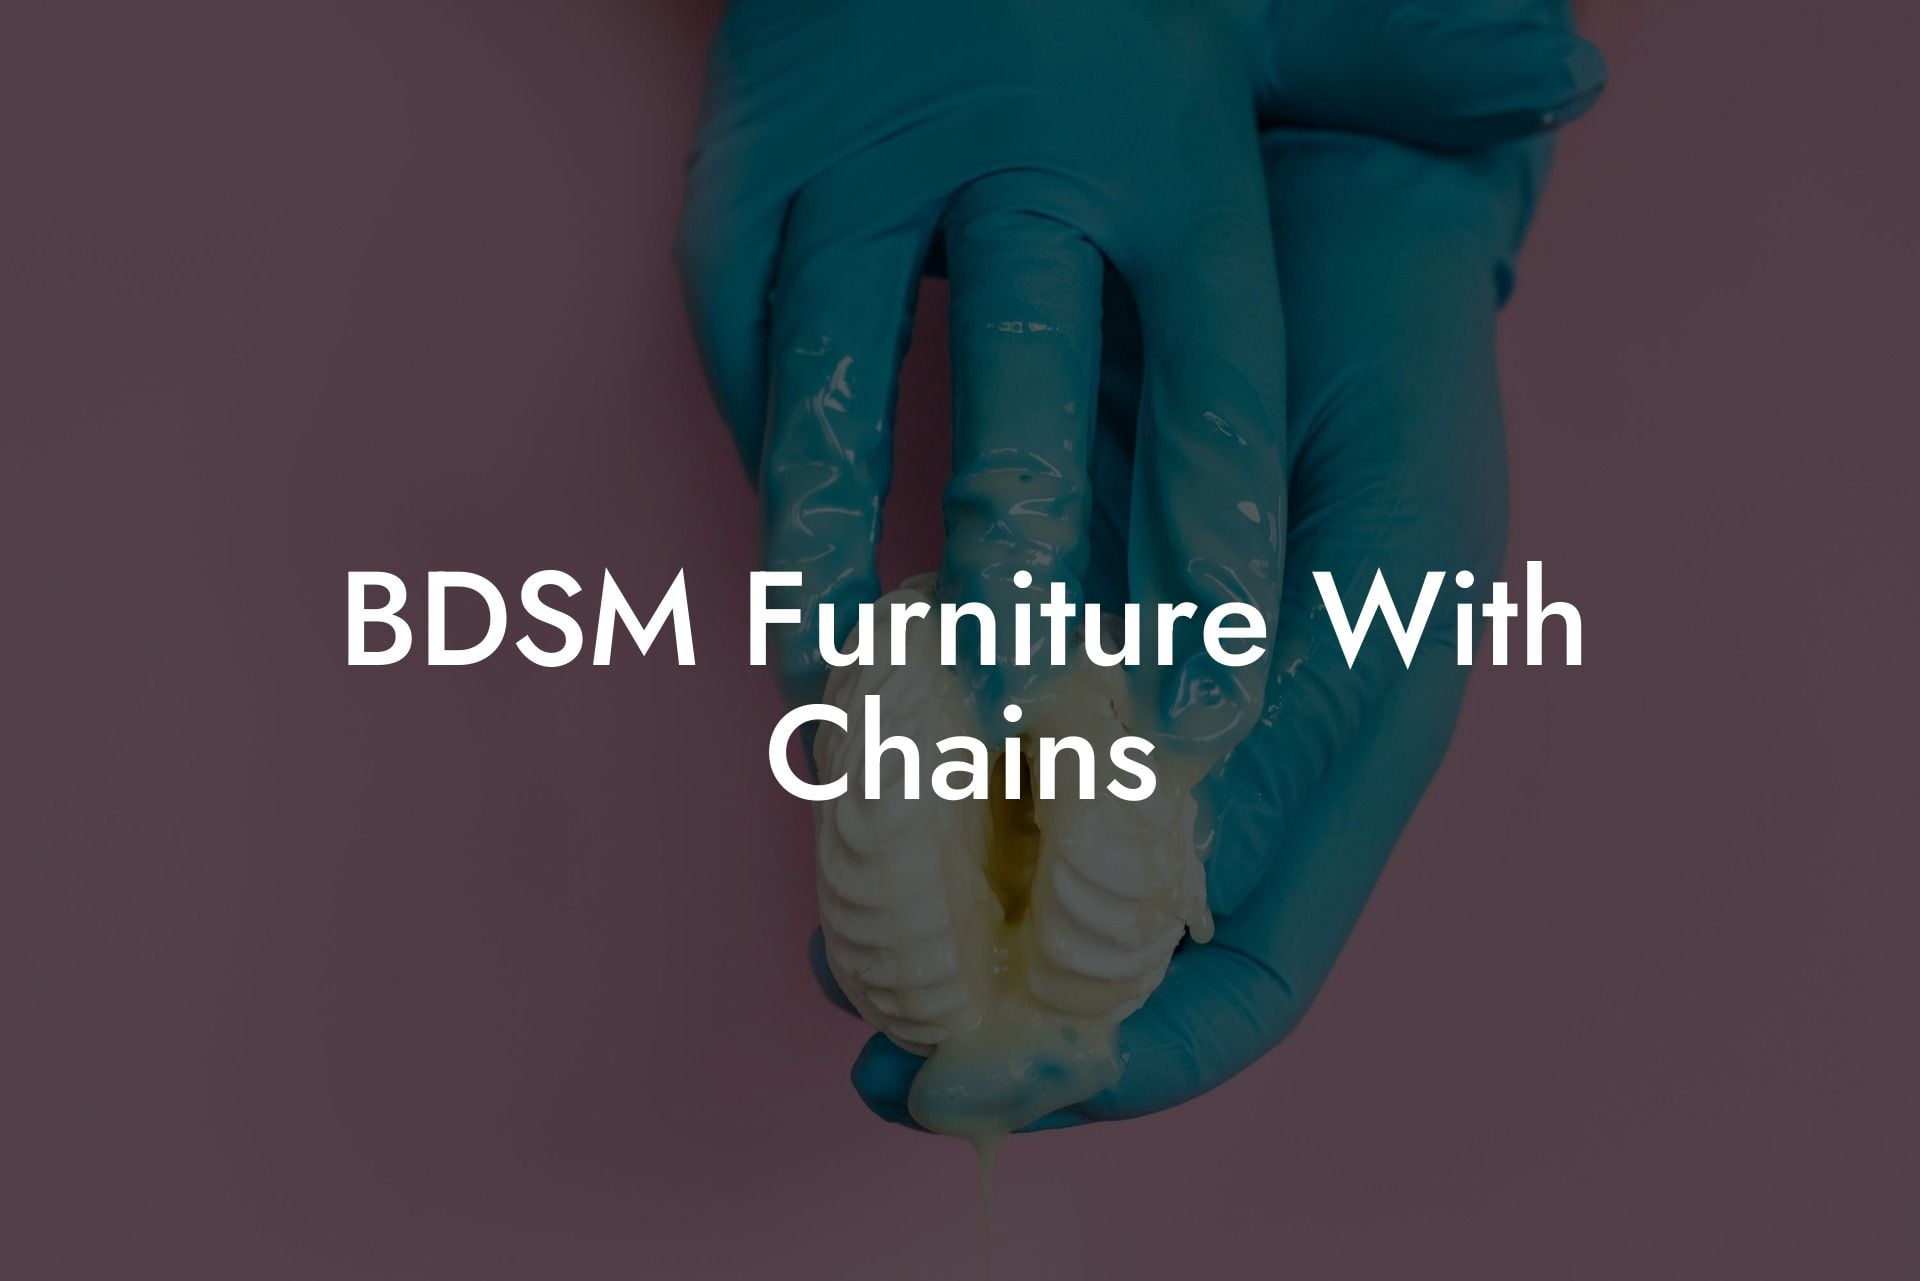 BDSM Furniture With Chains